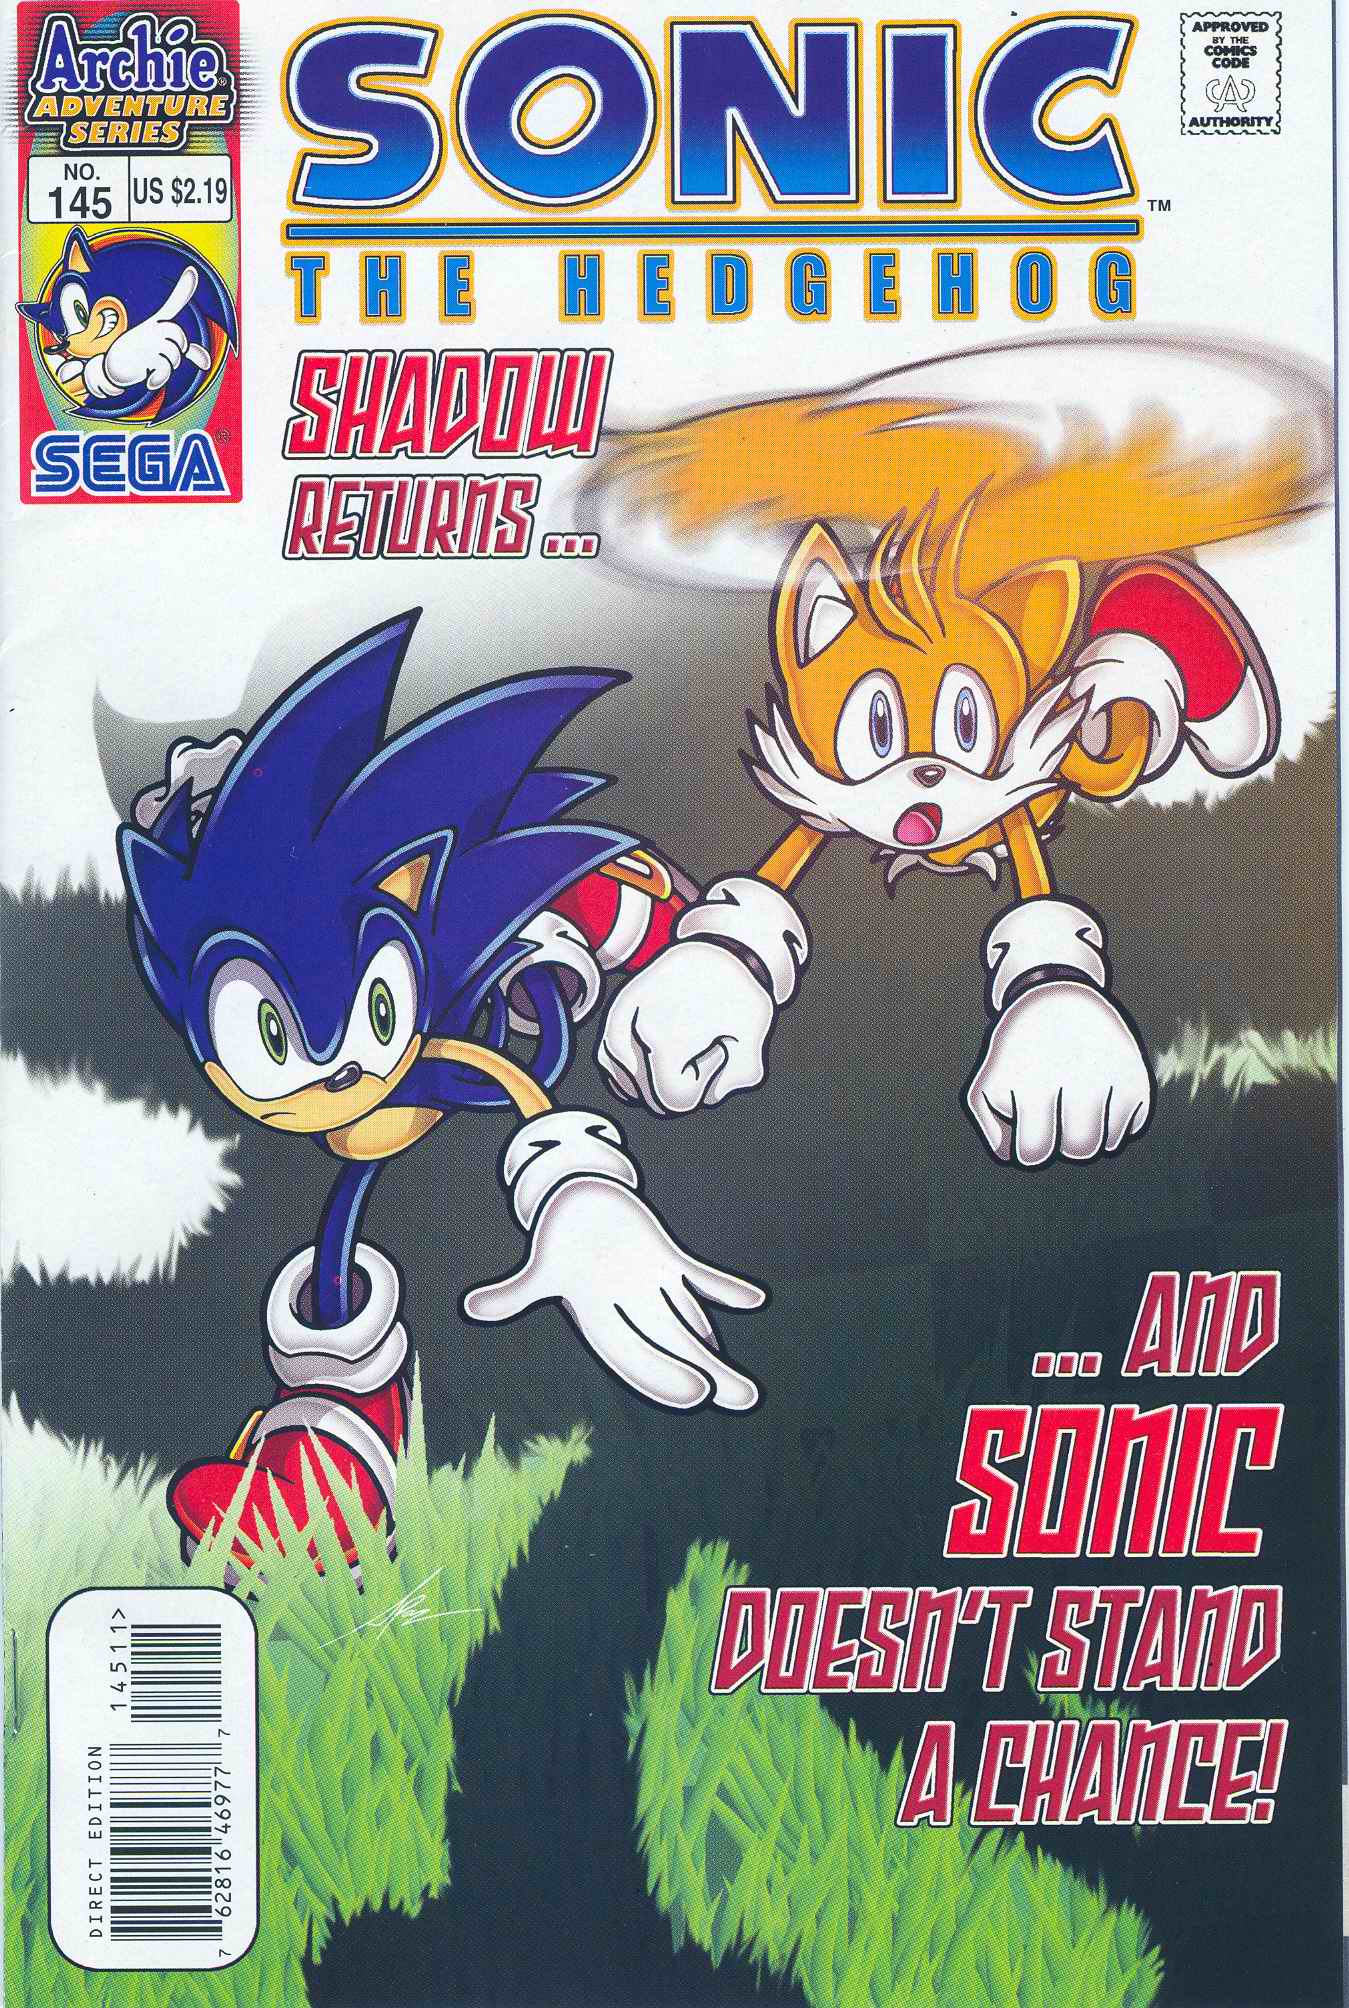 Sonic - Archie Adventure Series March 2005 Cover Page